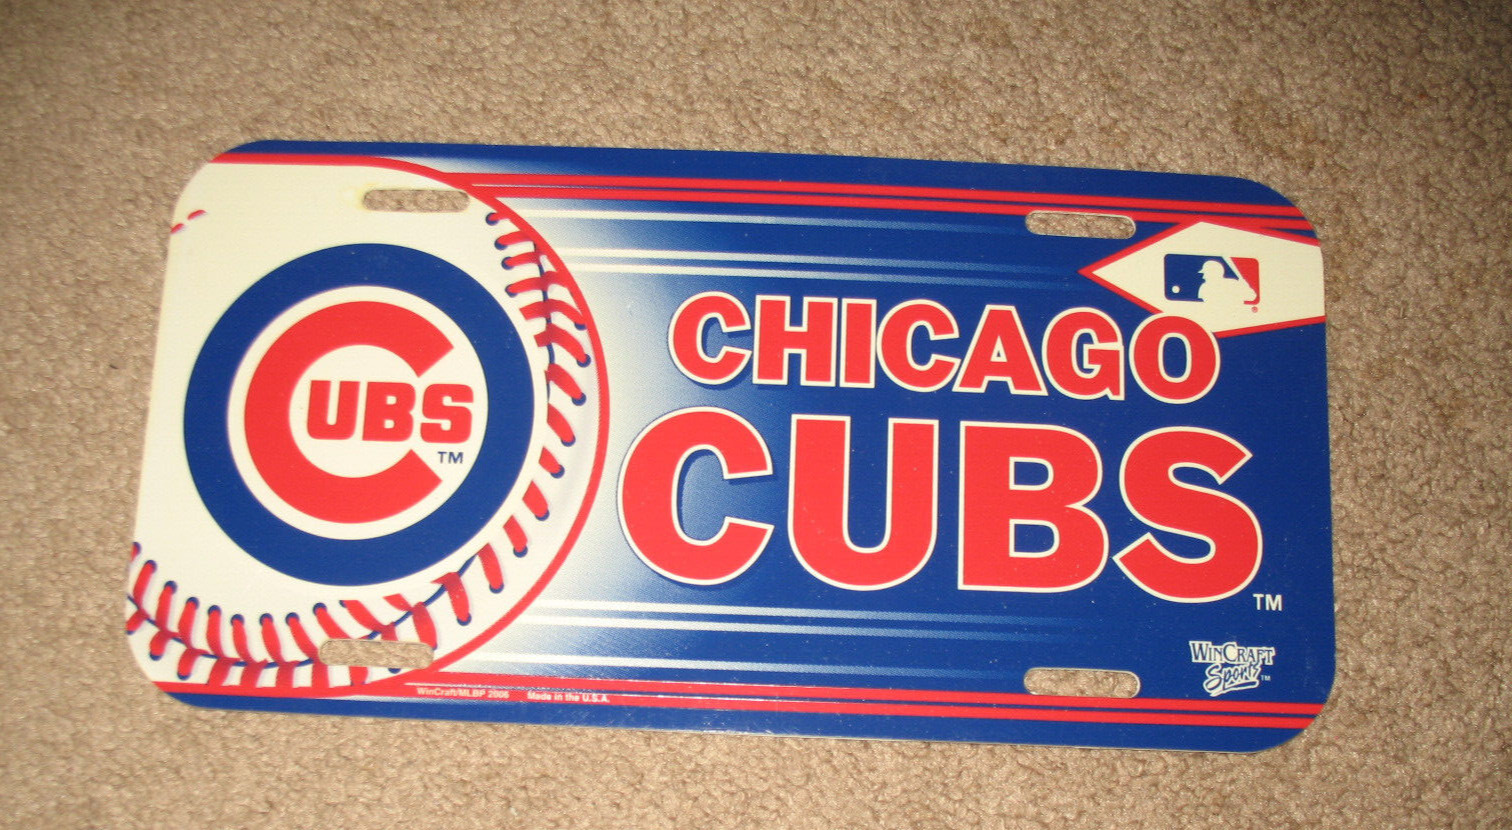 Chicago Cubs novelty plate